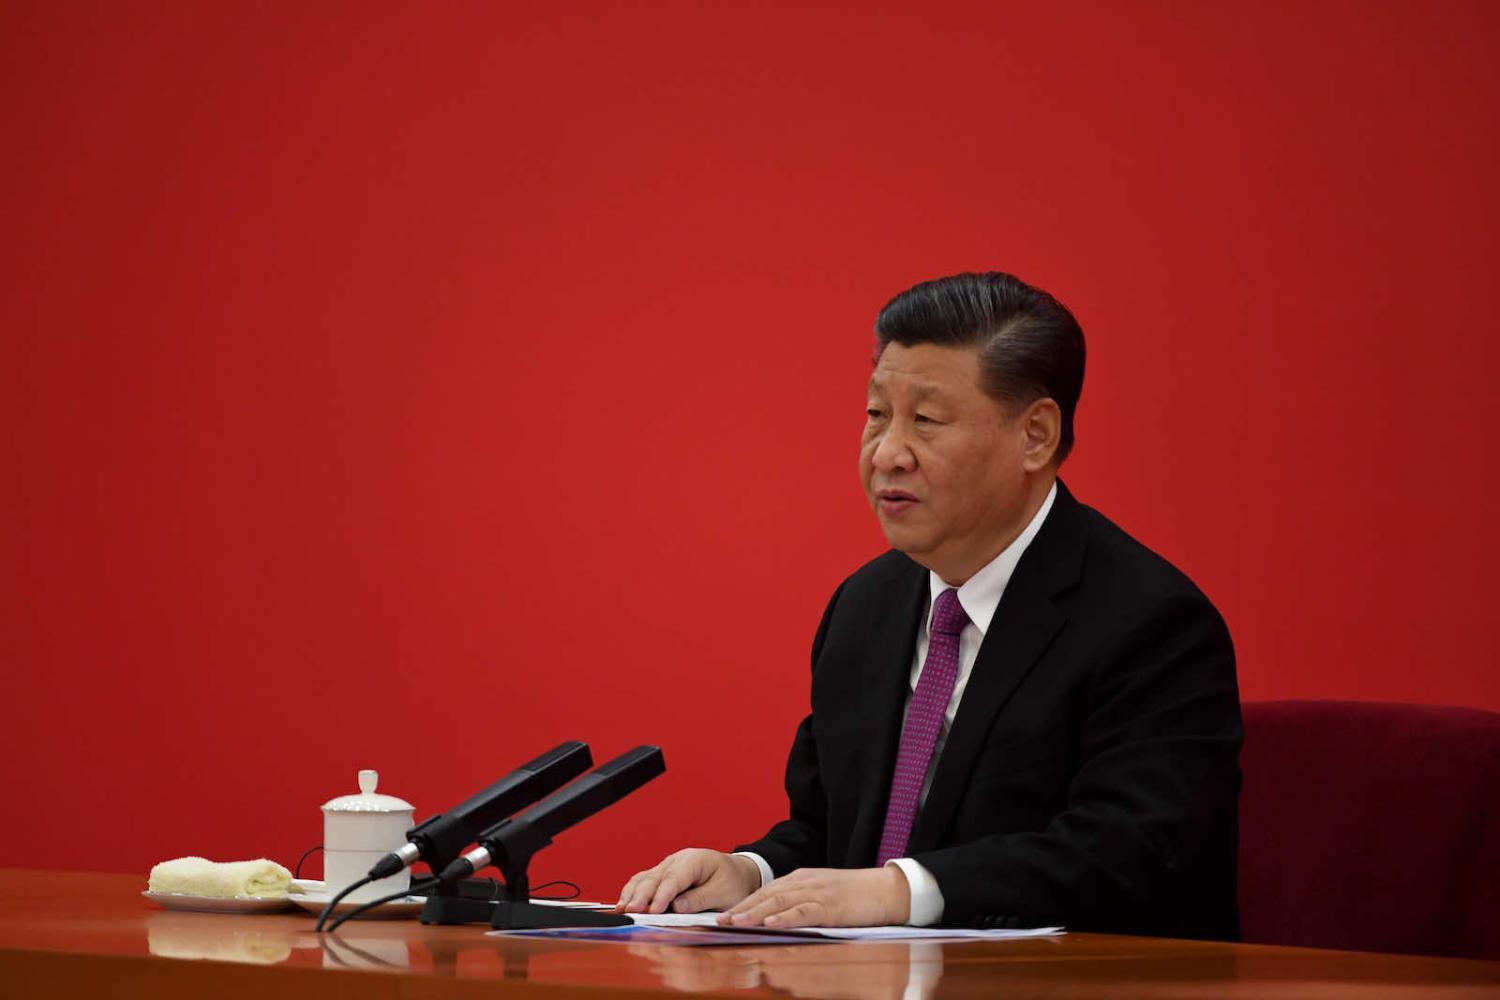 Traditional views of sovereignty and a strict adherence to principles of non-interference have been central to Xi Jinping’s approach to the world (Noel Celis/AFP via Getty Images)